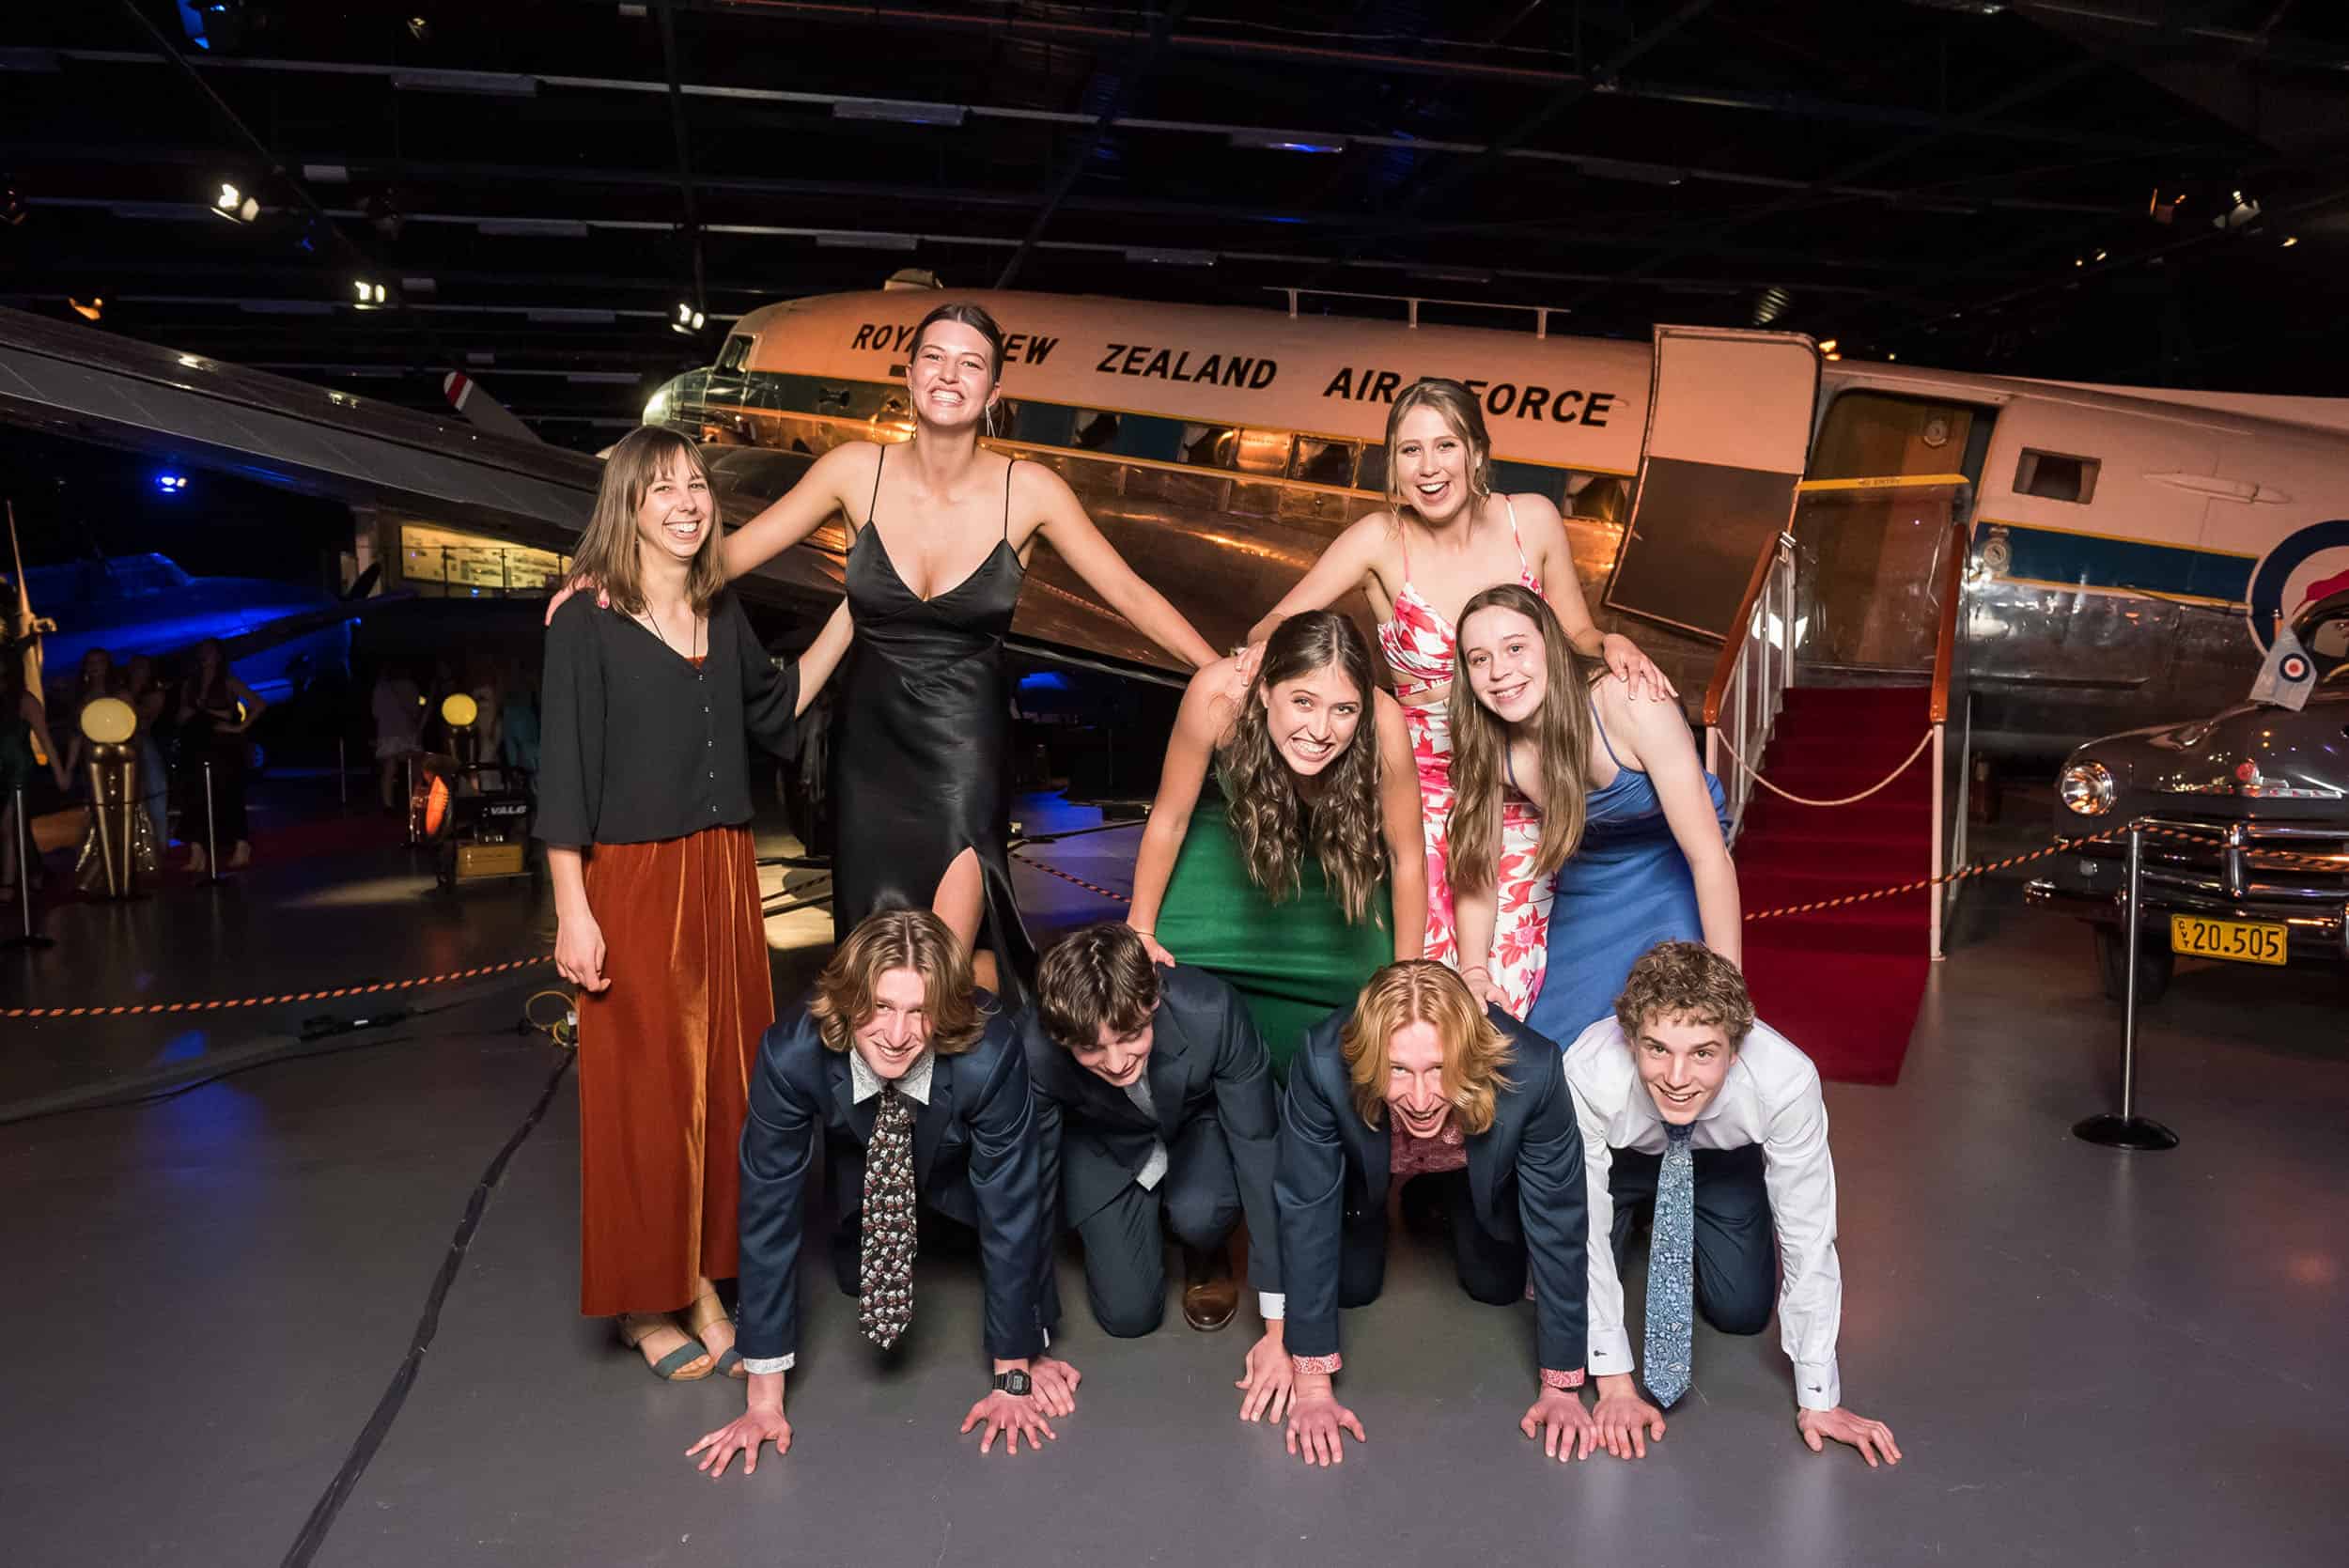 Nearly a pyramid as students attempt to go higher posing for photos at their school ball, Wigram Air Force Museum, CHCH.